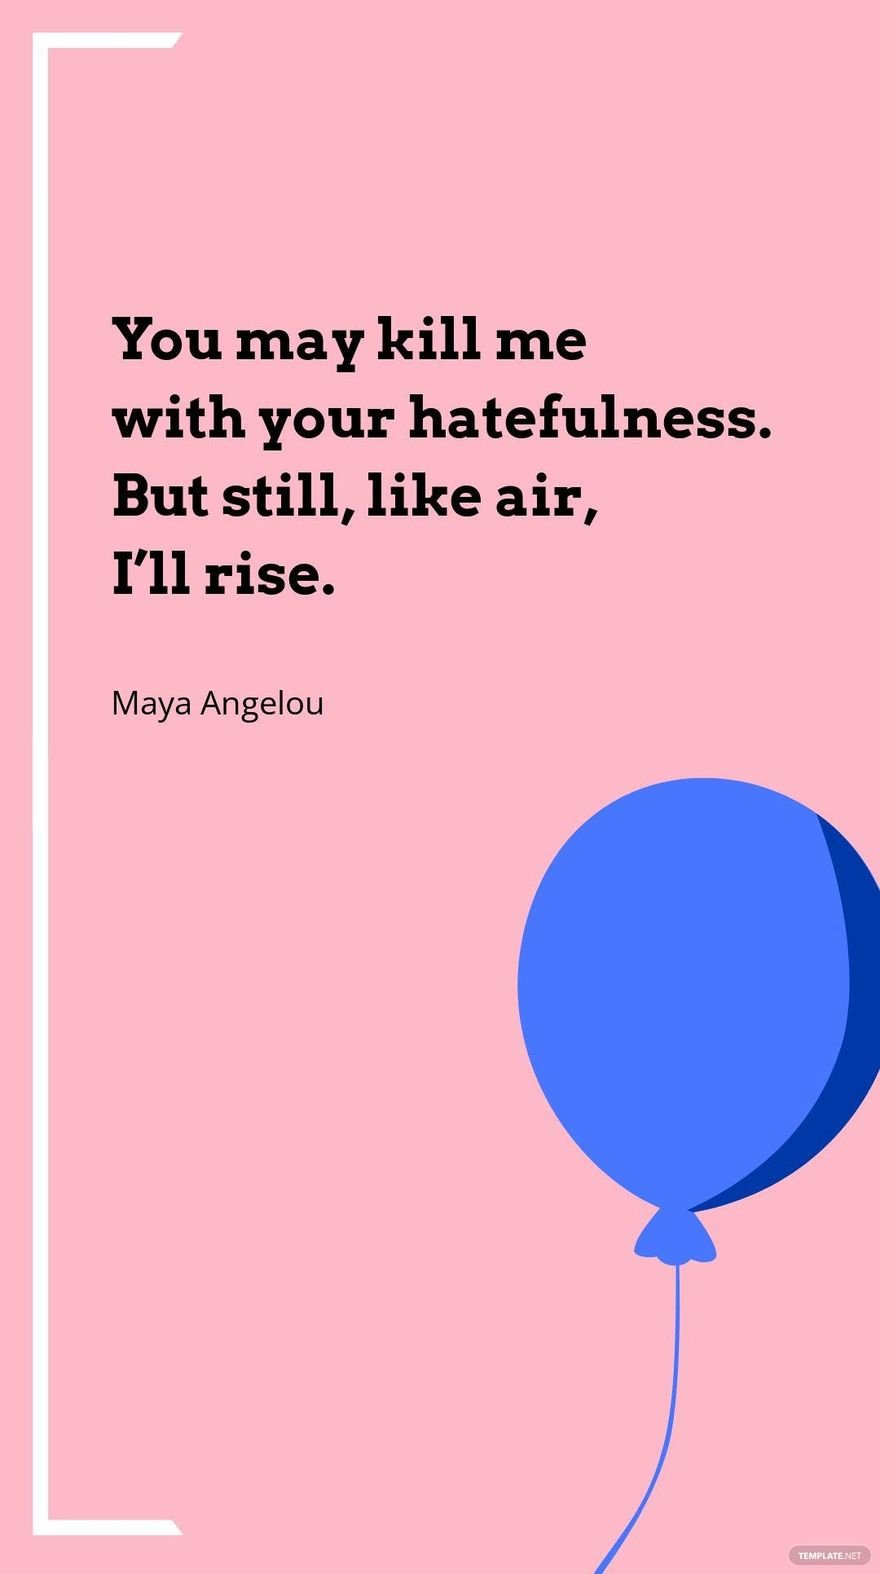 Maya Angelou - You may kill me with your hatefulness. But still, like air, I’ll rise.